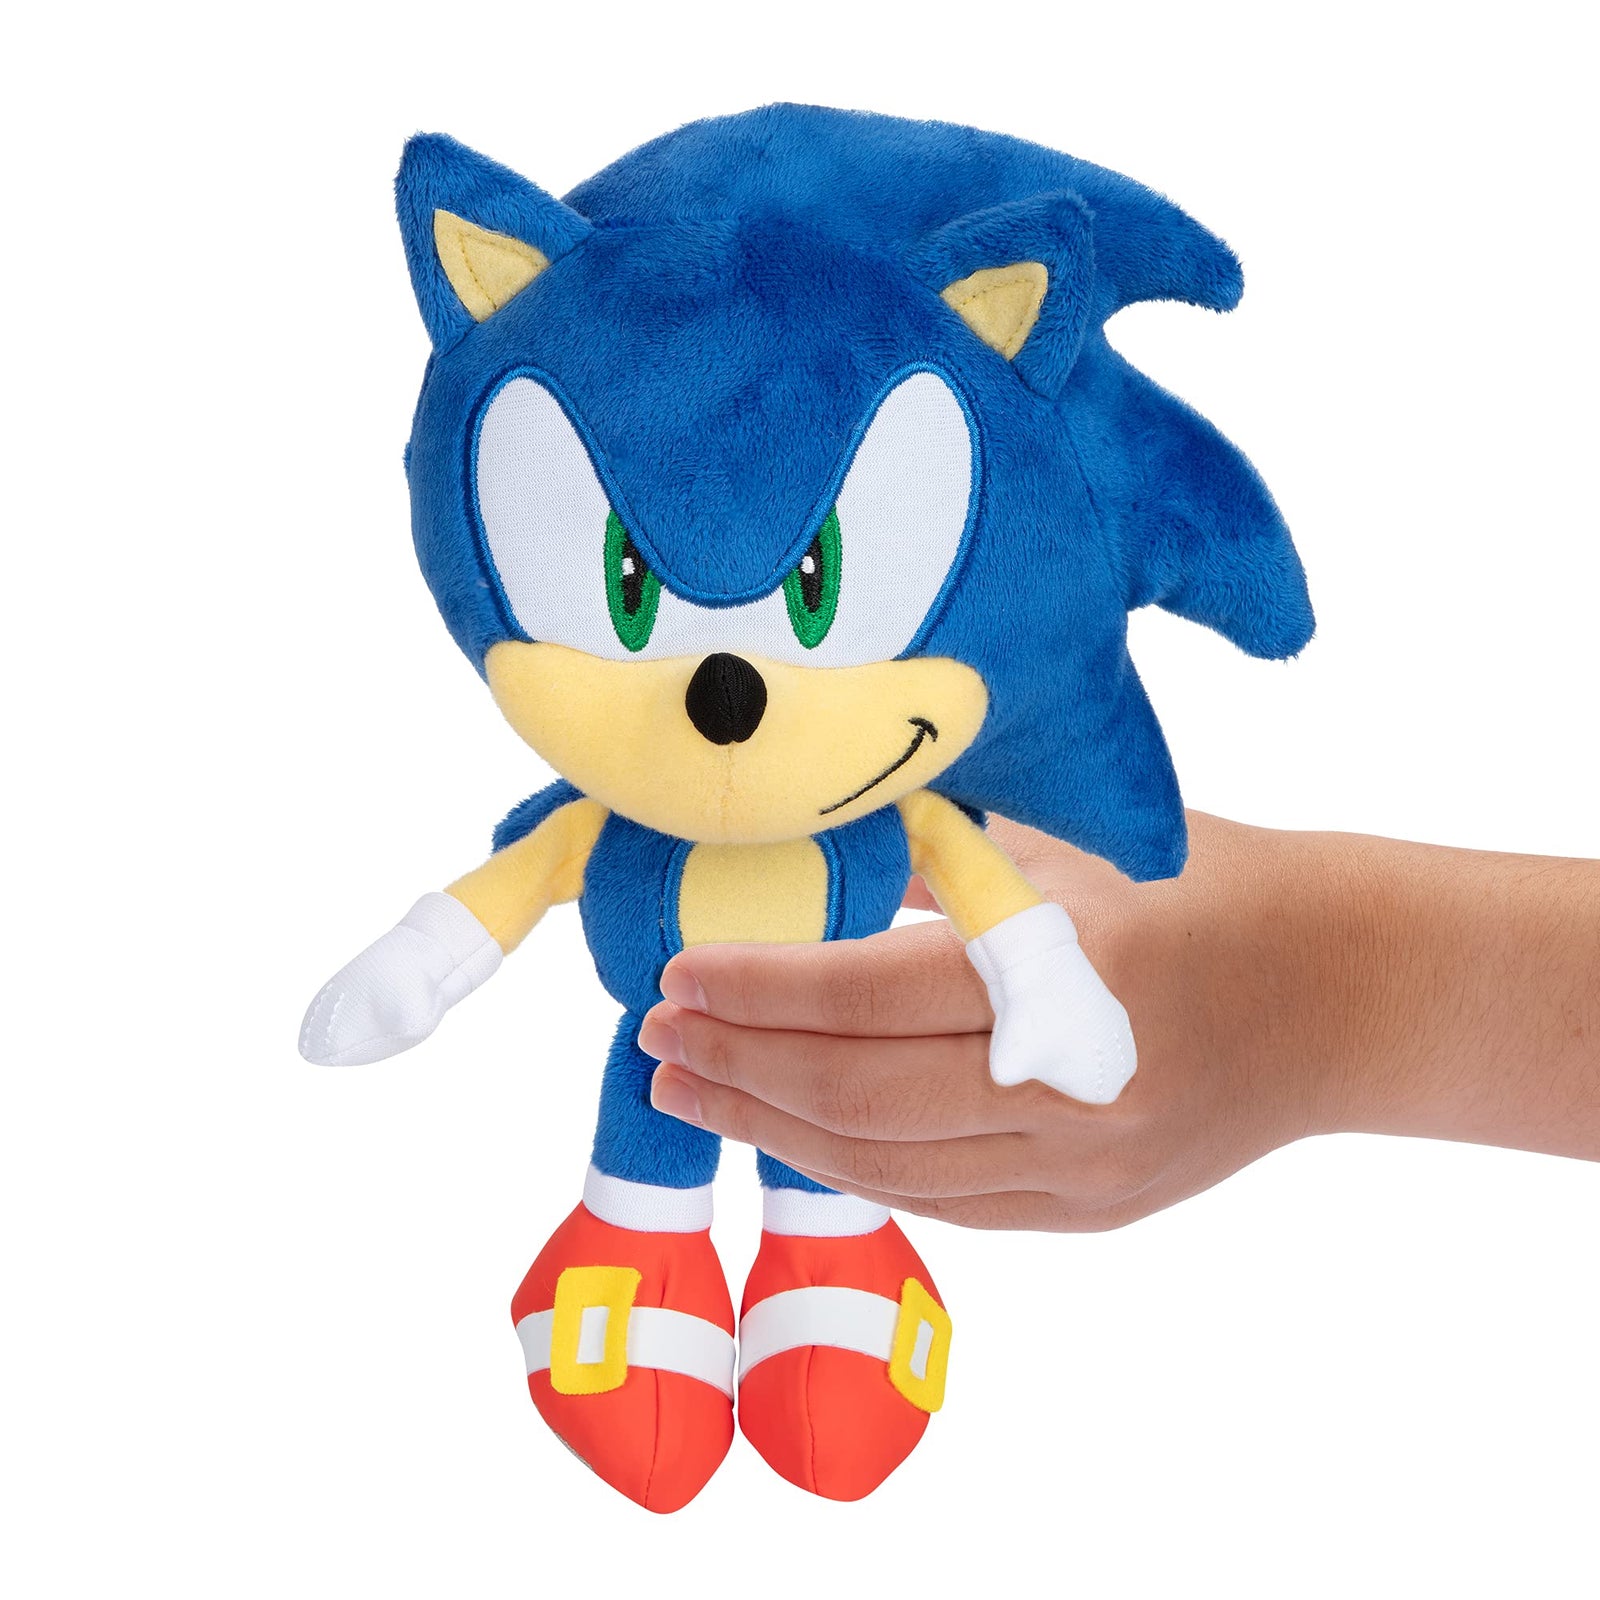 Sonic The Hedgehog Plush 9-Inch Modern Sonic Collectible Toy